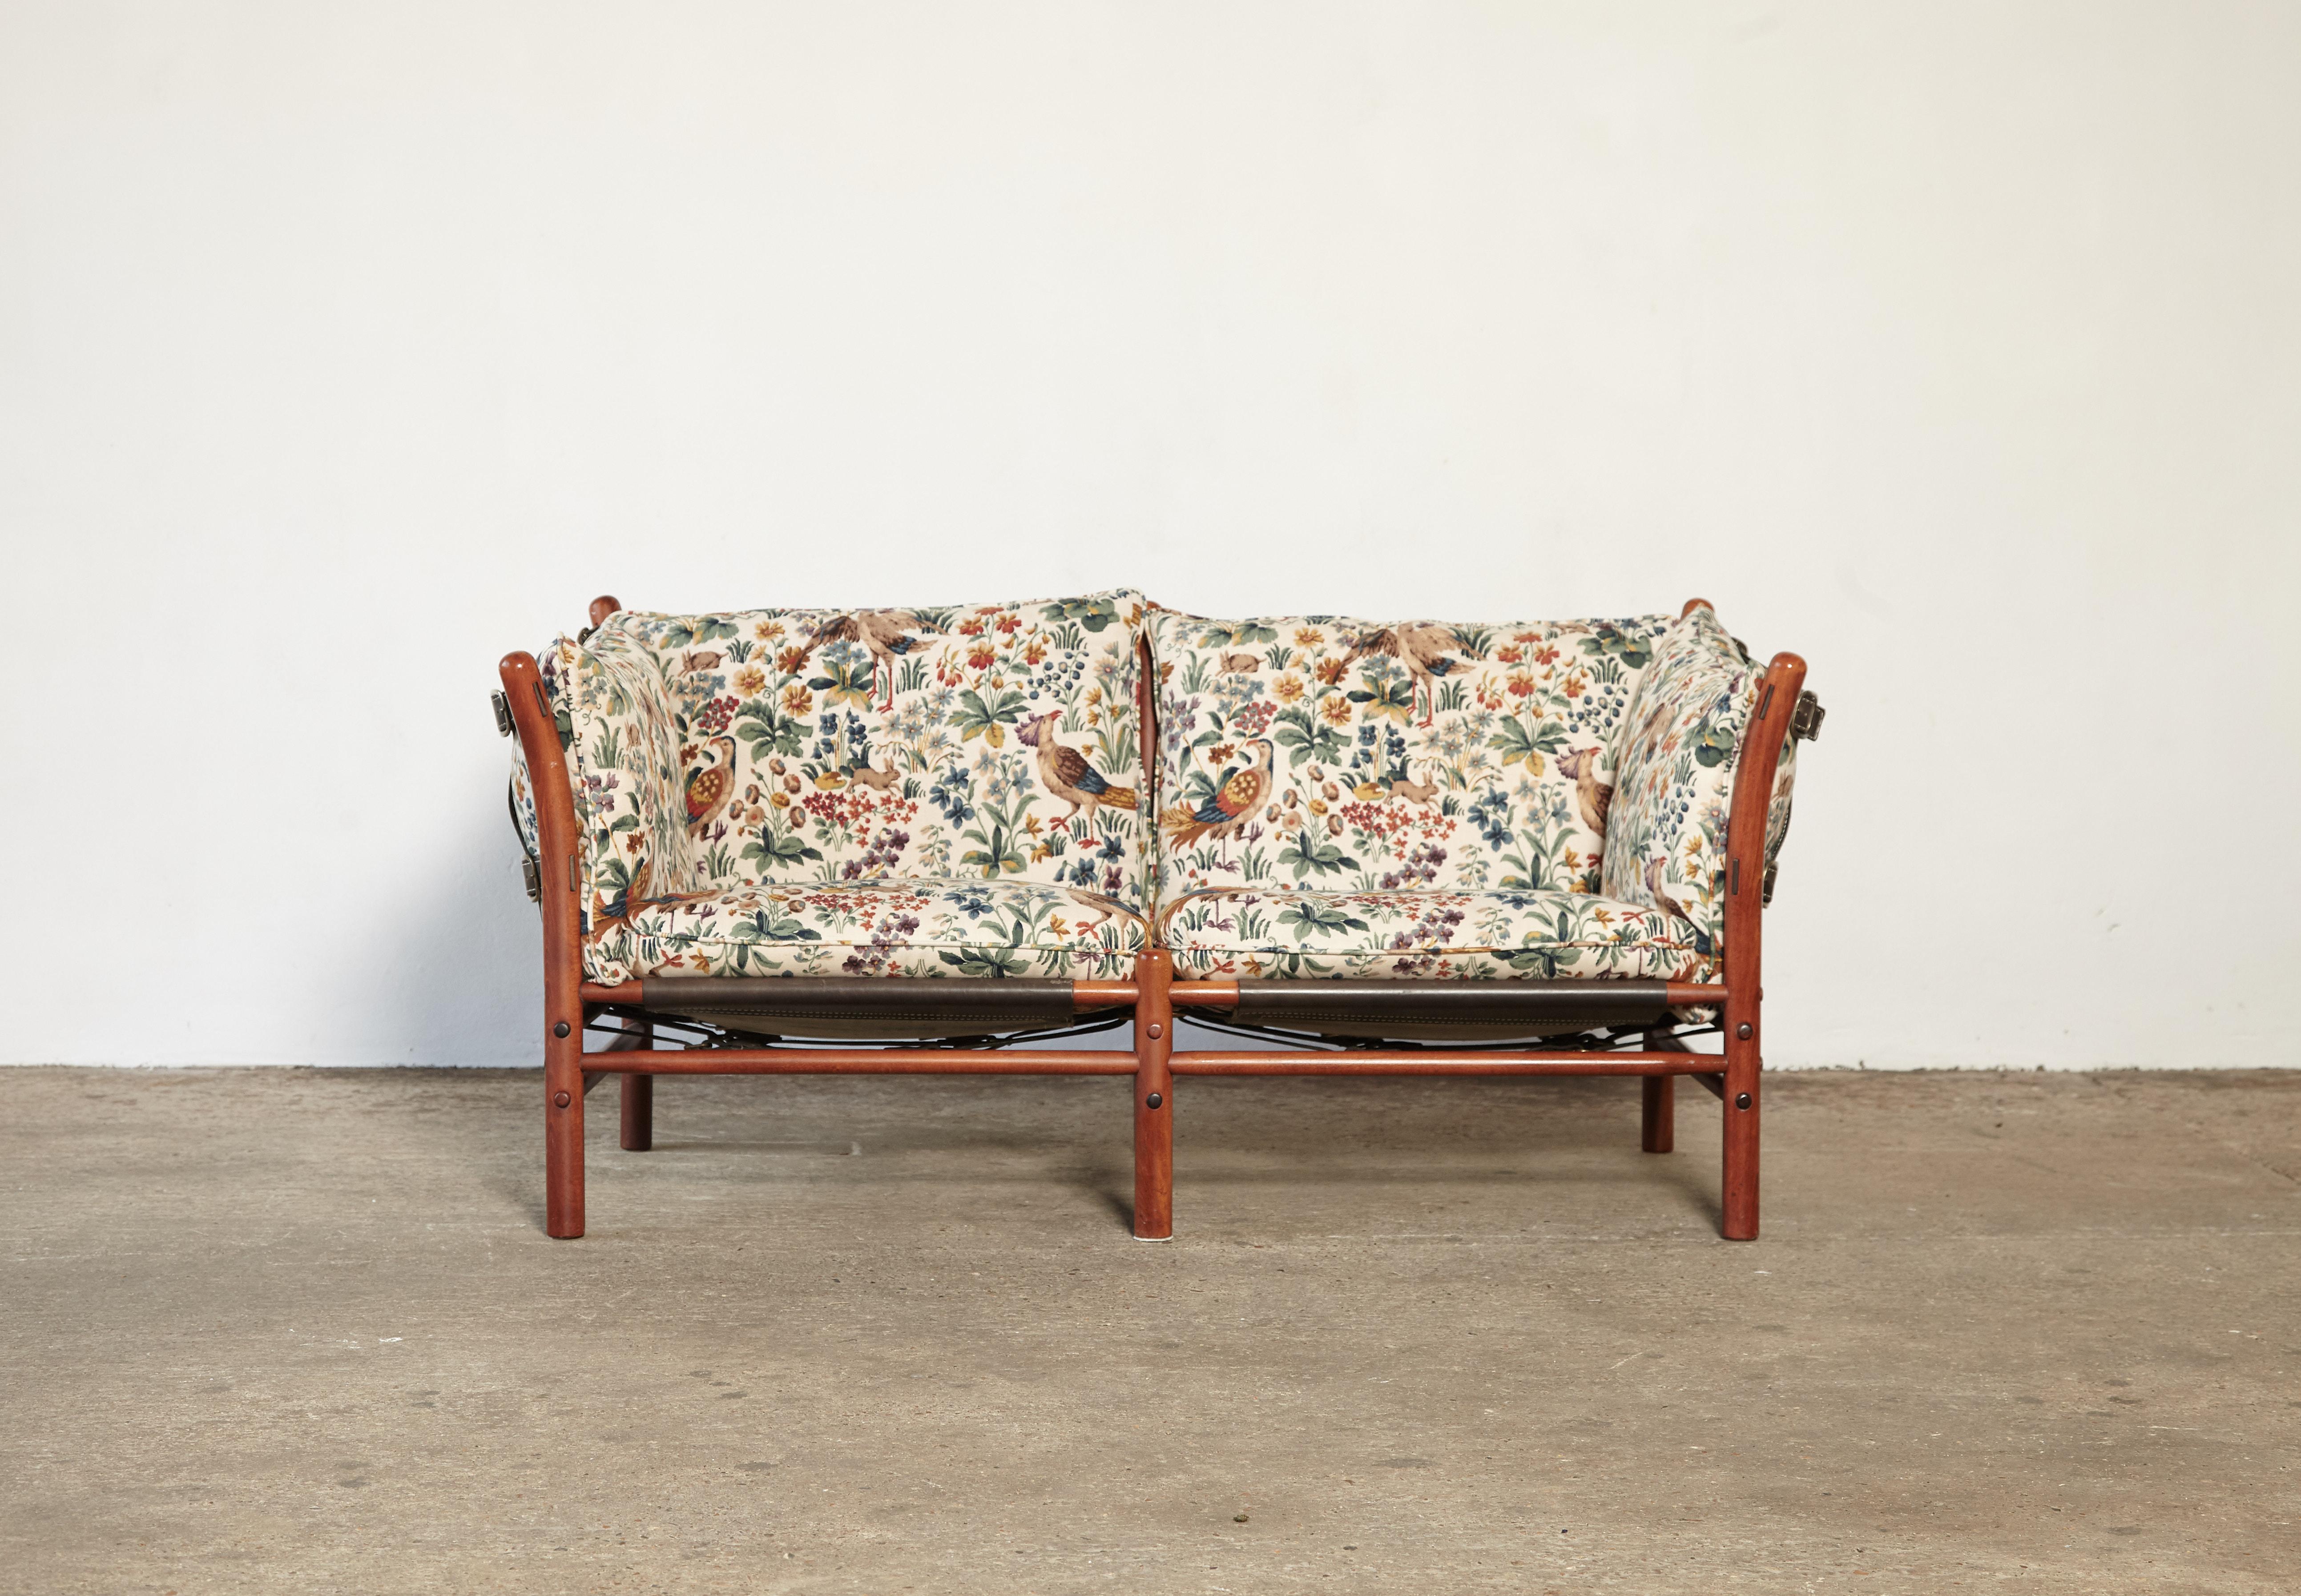 An original two-seat Arne Norell Ilona sofa in patterned fabric. Made by Norell Mobler in Sweden. In very good vintage condition with minor signs of use and wear relative to age. Upholstery in very good condition. The cushions are loose and easy to